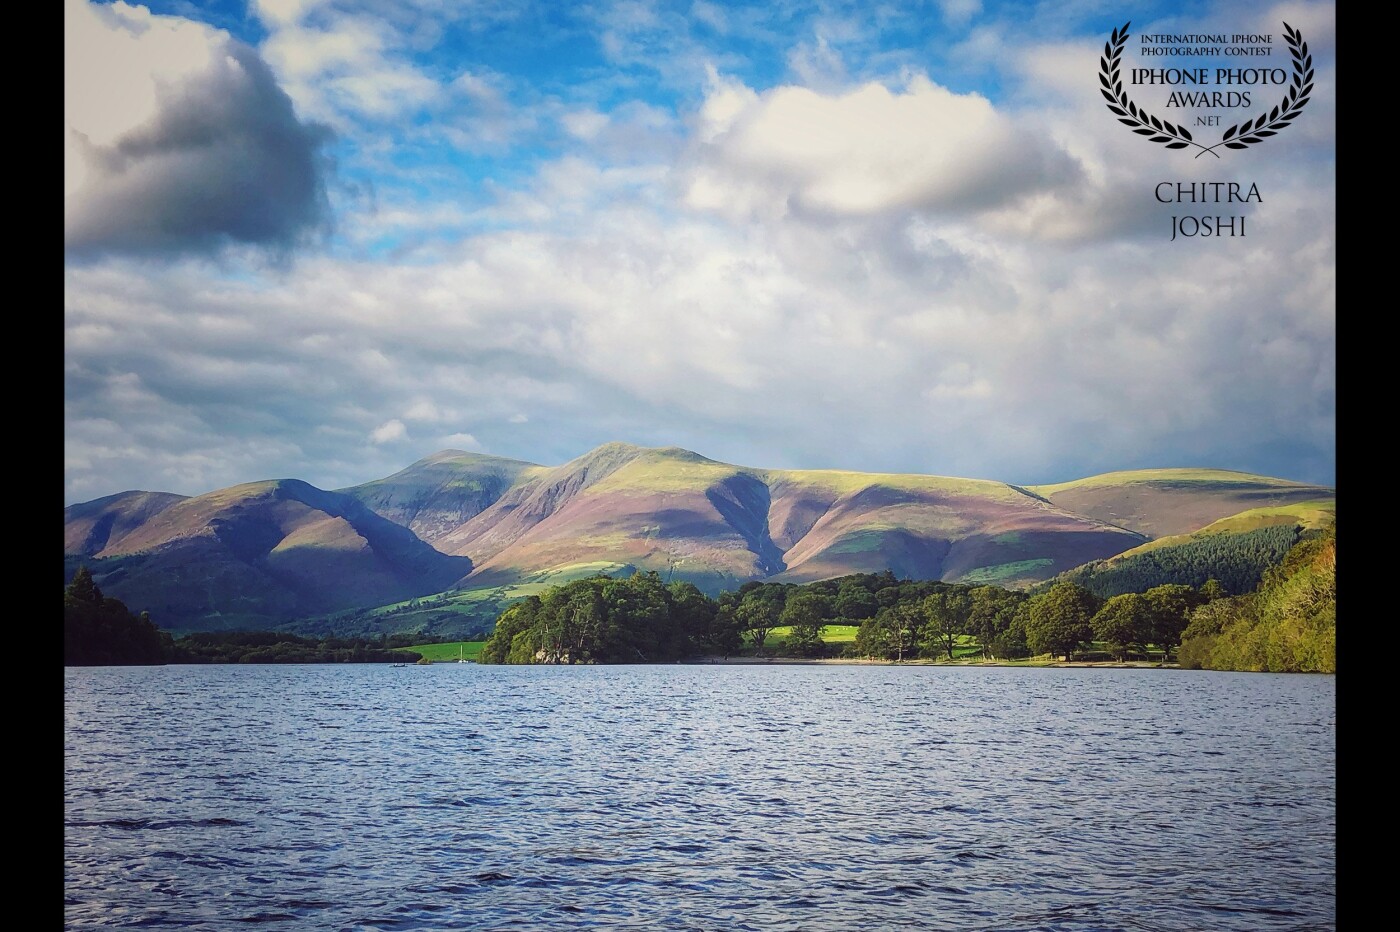 "Majestic Mountains" I clicked this picturesque scenery at Derwent Water, Lake District, United Kingdom while enjoying the soothing sounds of the lake and echoes of mountains. 